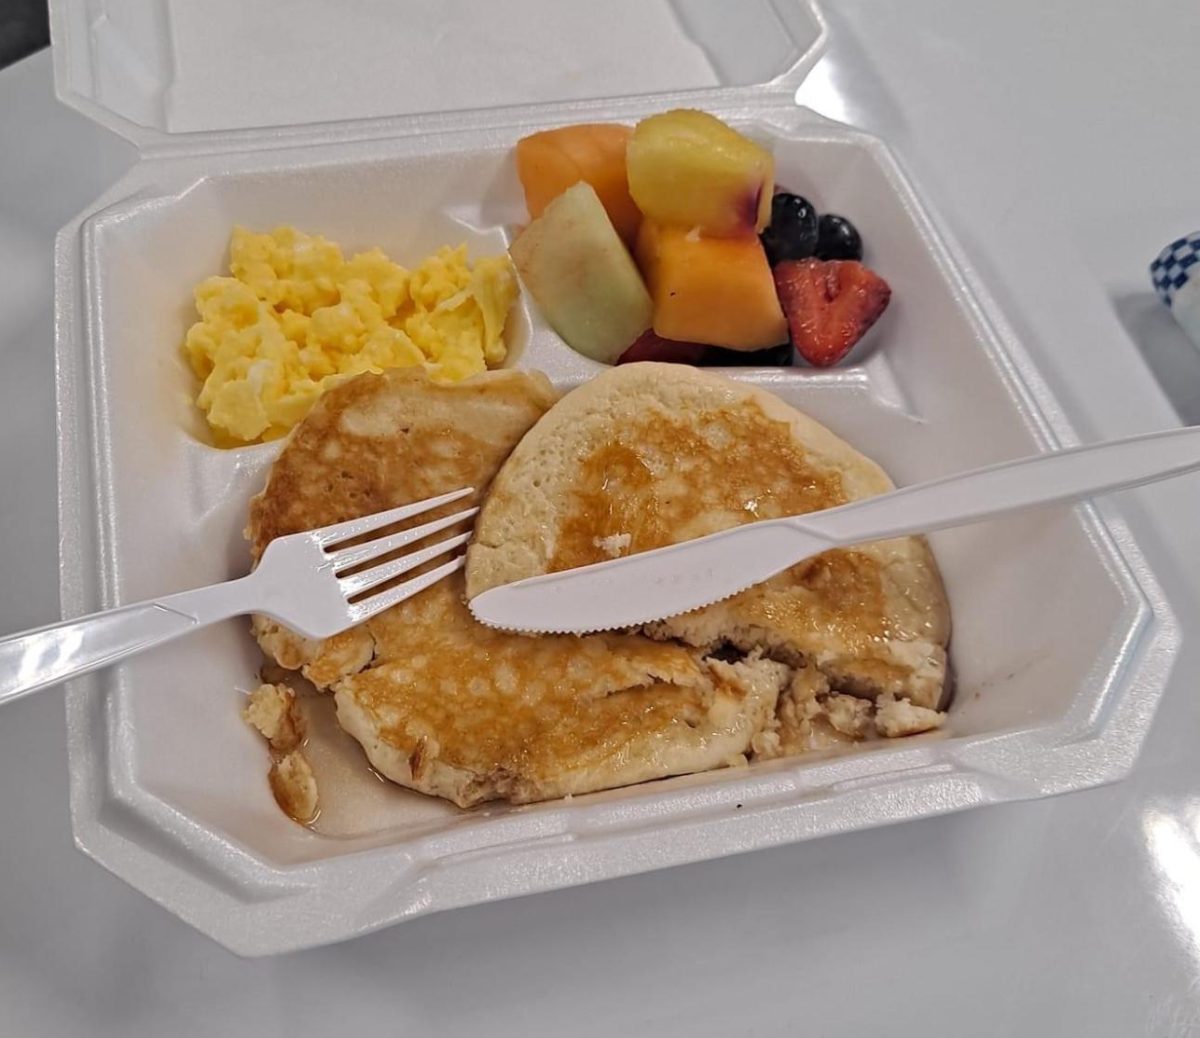 Teachers who are given a Breakfast Buddies invitation can choose from a variety of options.